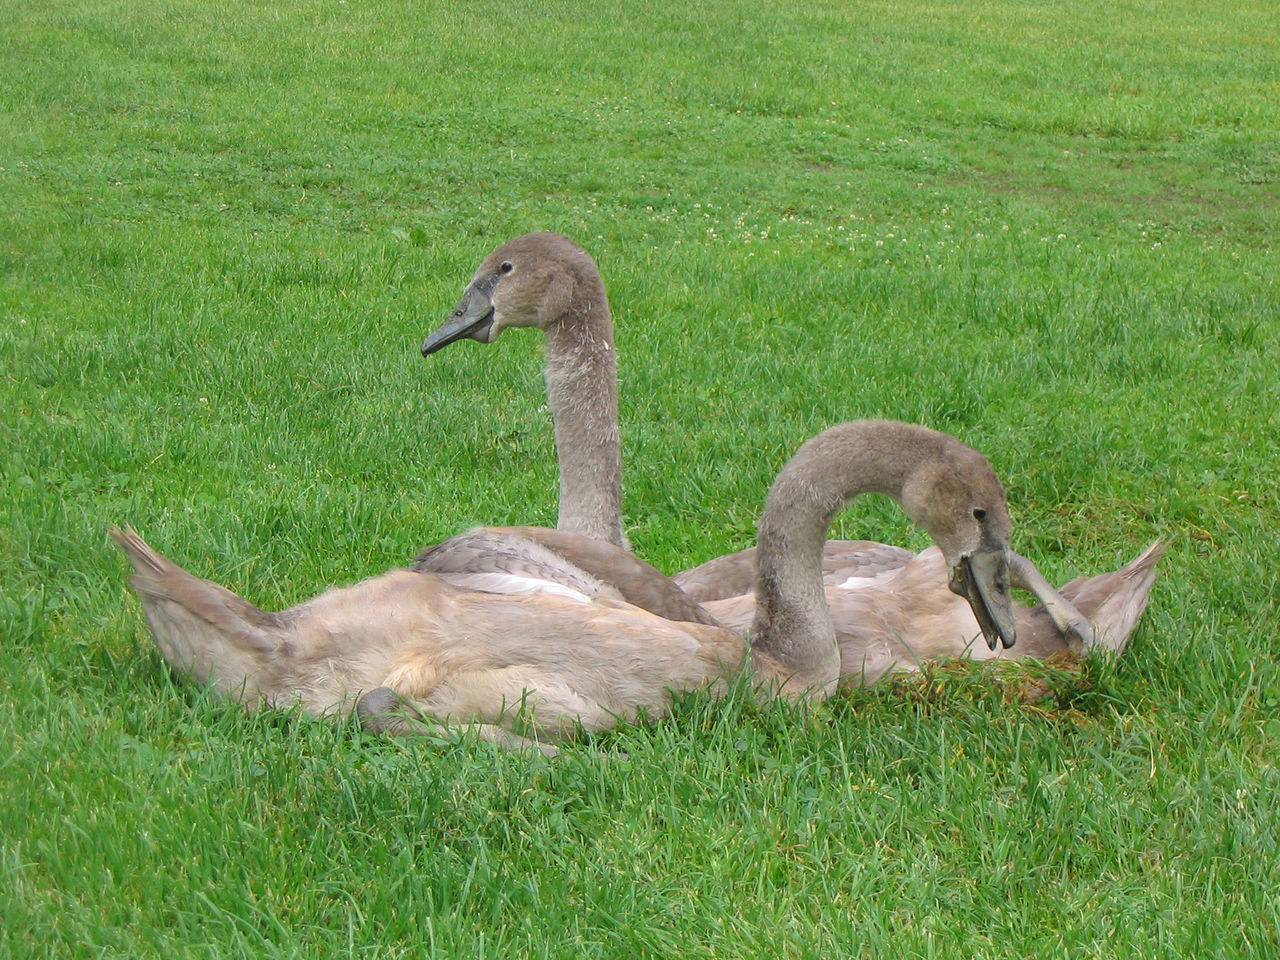 VIEW OF SWAN ON FIELD